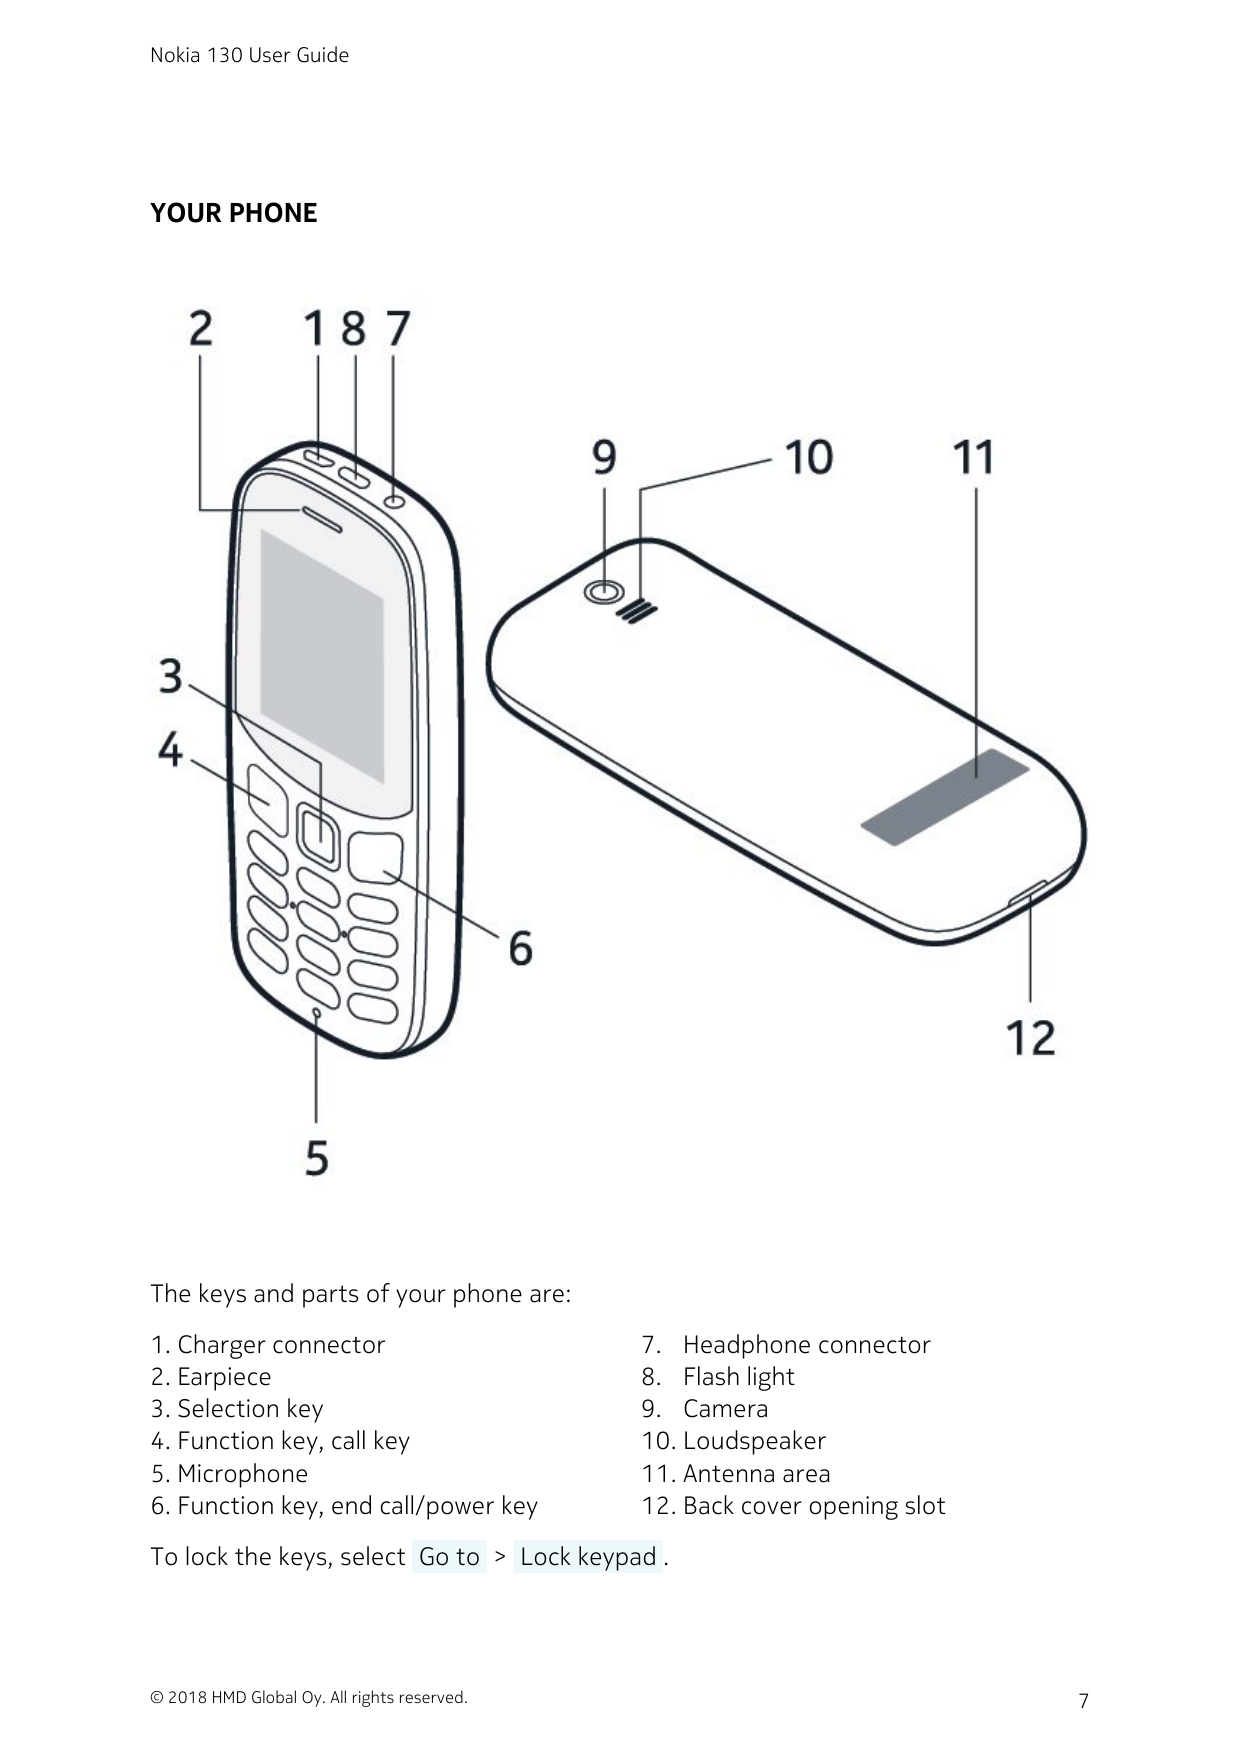 Nokia 130 User GuideYOUR PHONEThe keys and parts of your phone are:1. Charger connector2. Earpiece3. Selection key4. Function ke